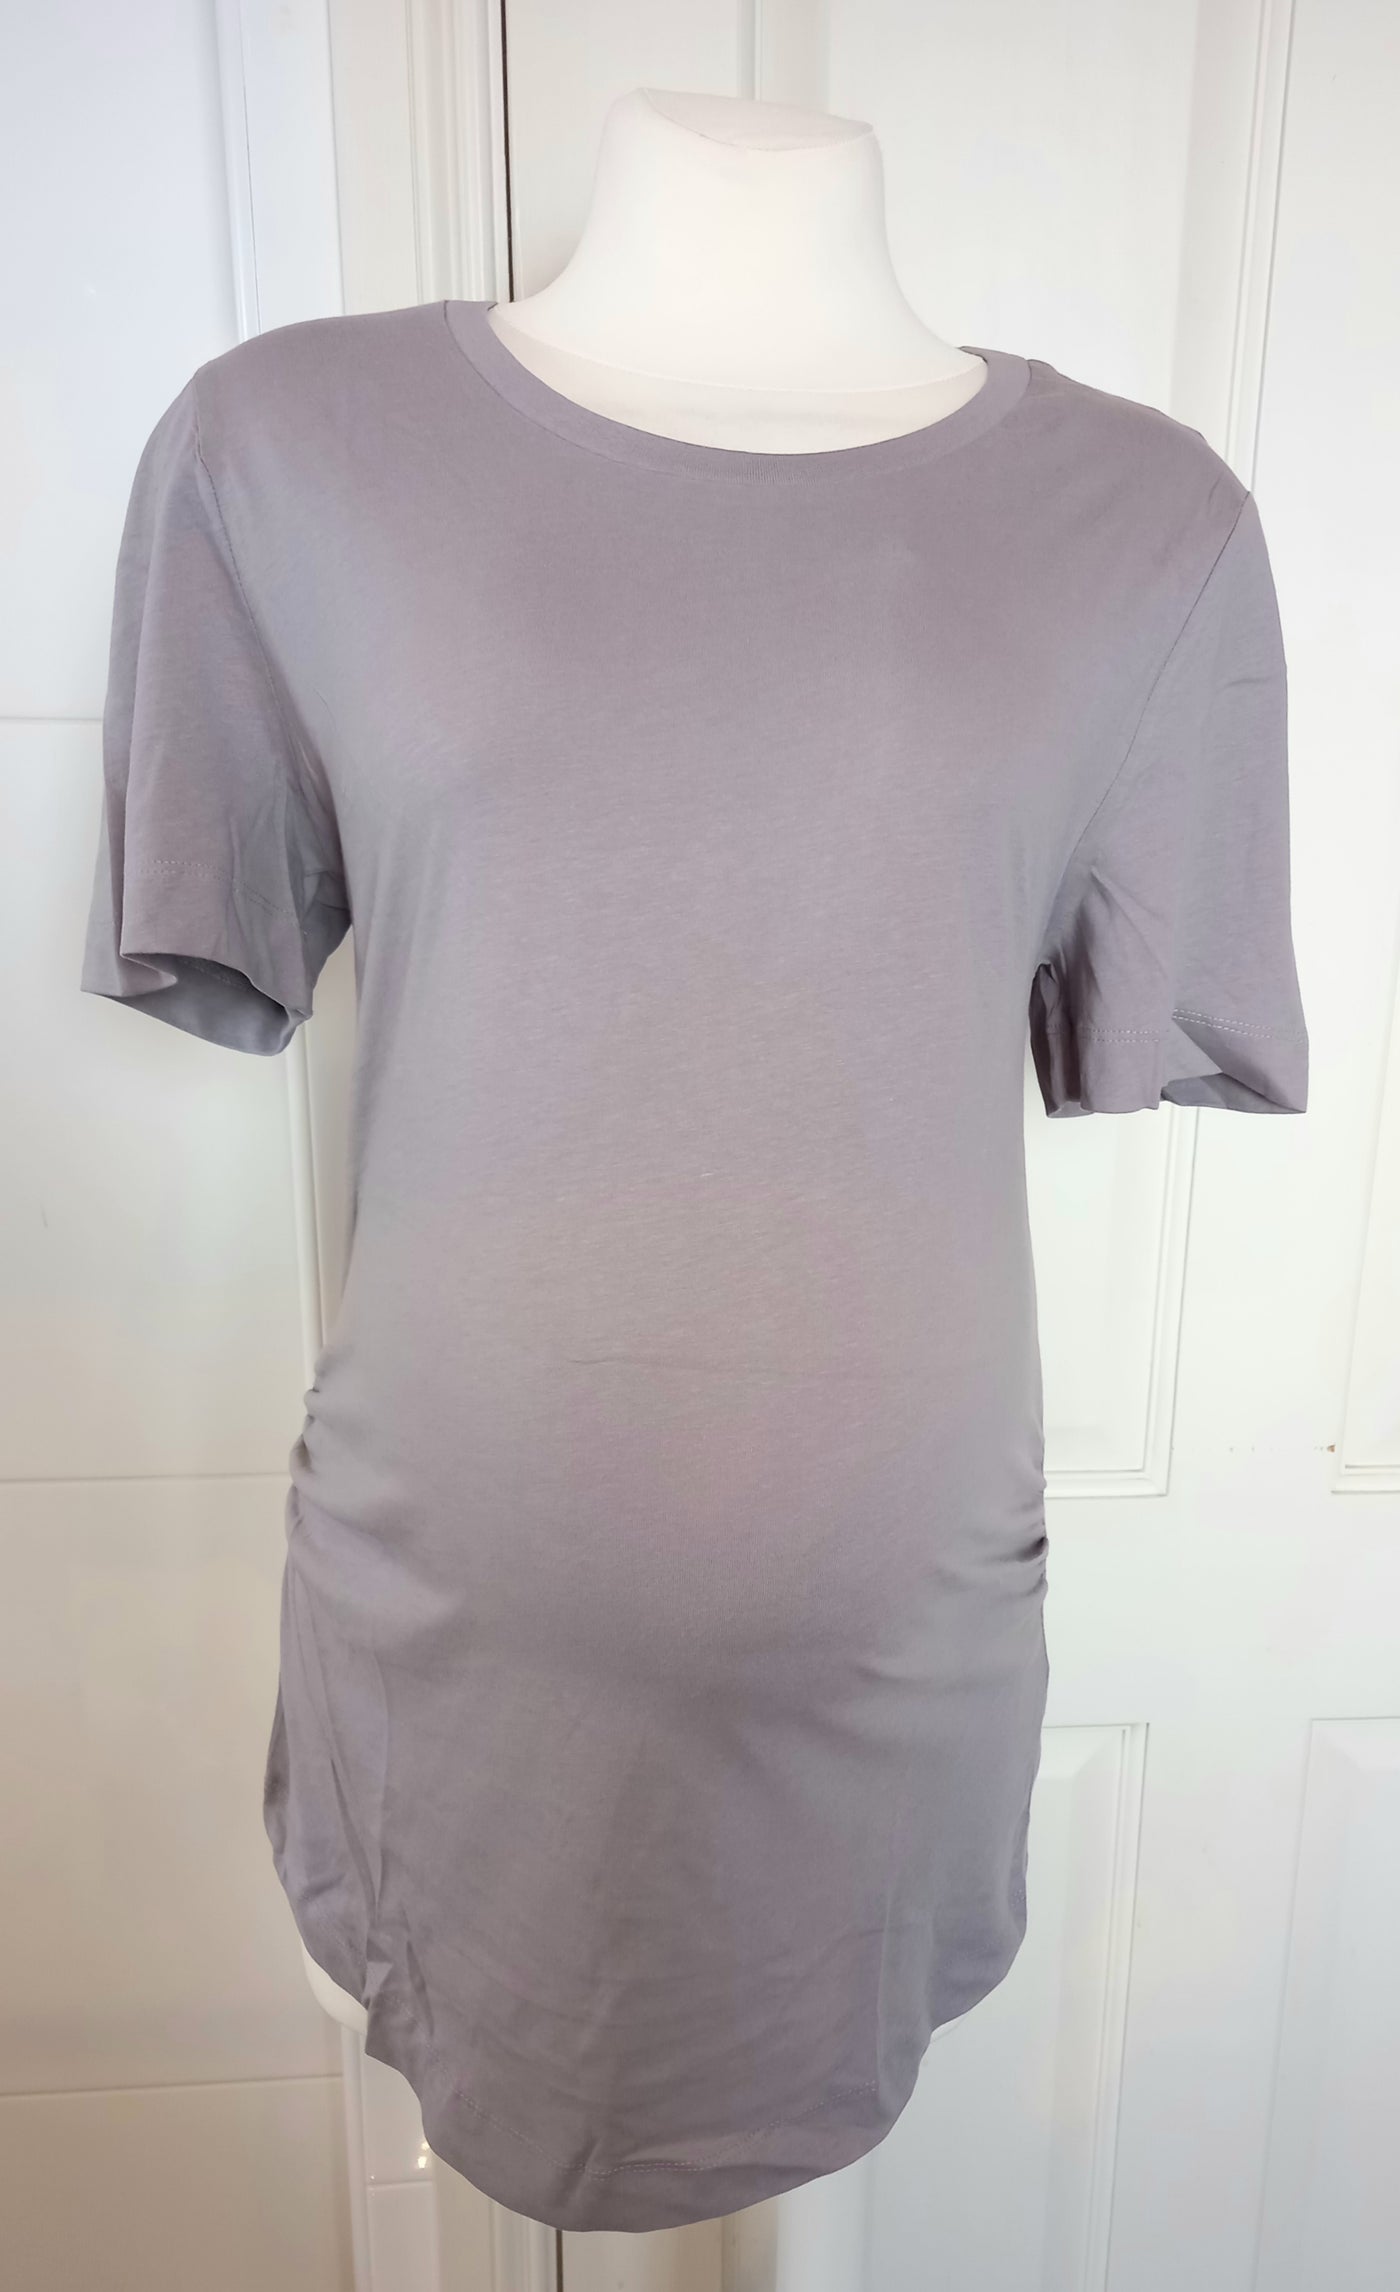 Very Maternity 2 pack Blush Pink & Grey T-Shirt Tops (BNWT) - Size 14